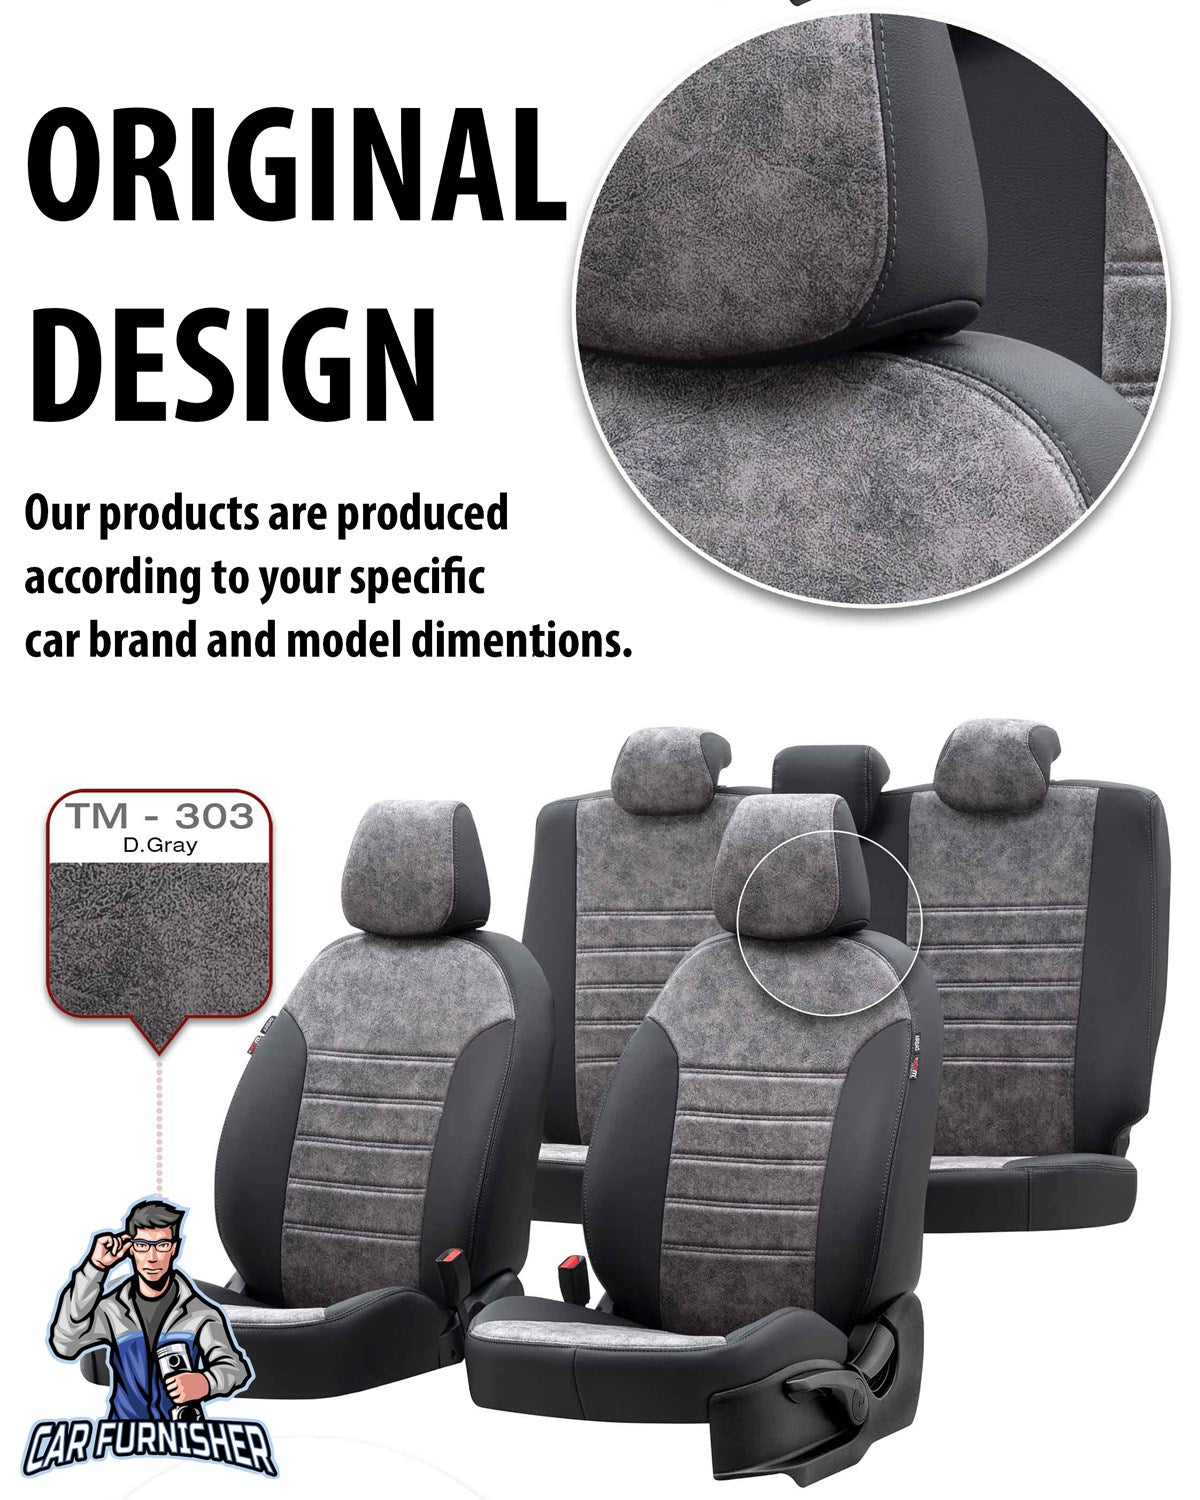 Chery Alia Seat Covers Milano Suede Design Ivory Leather & Suede Fabric